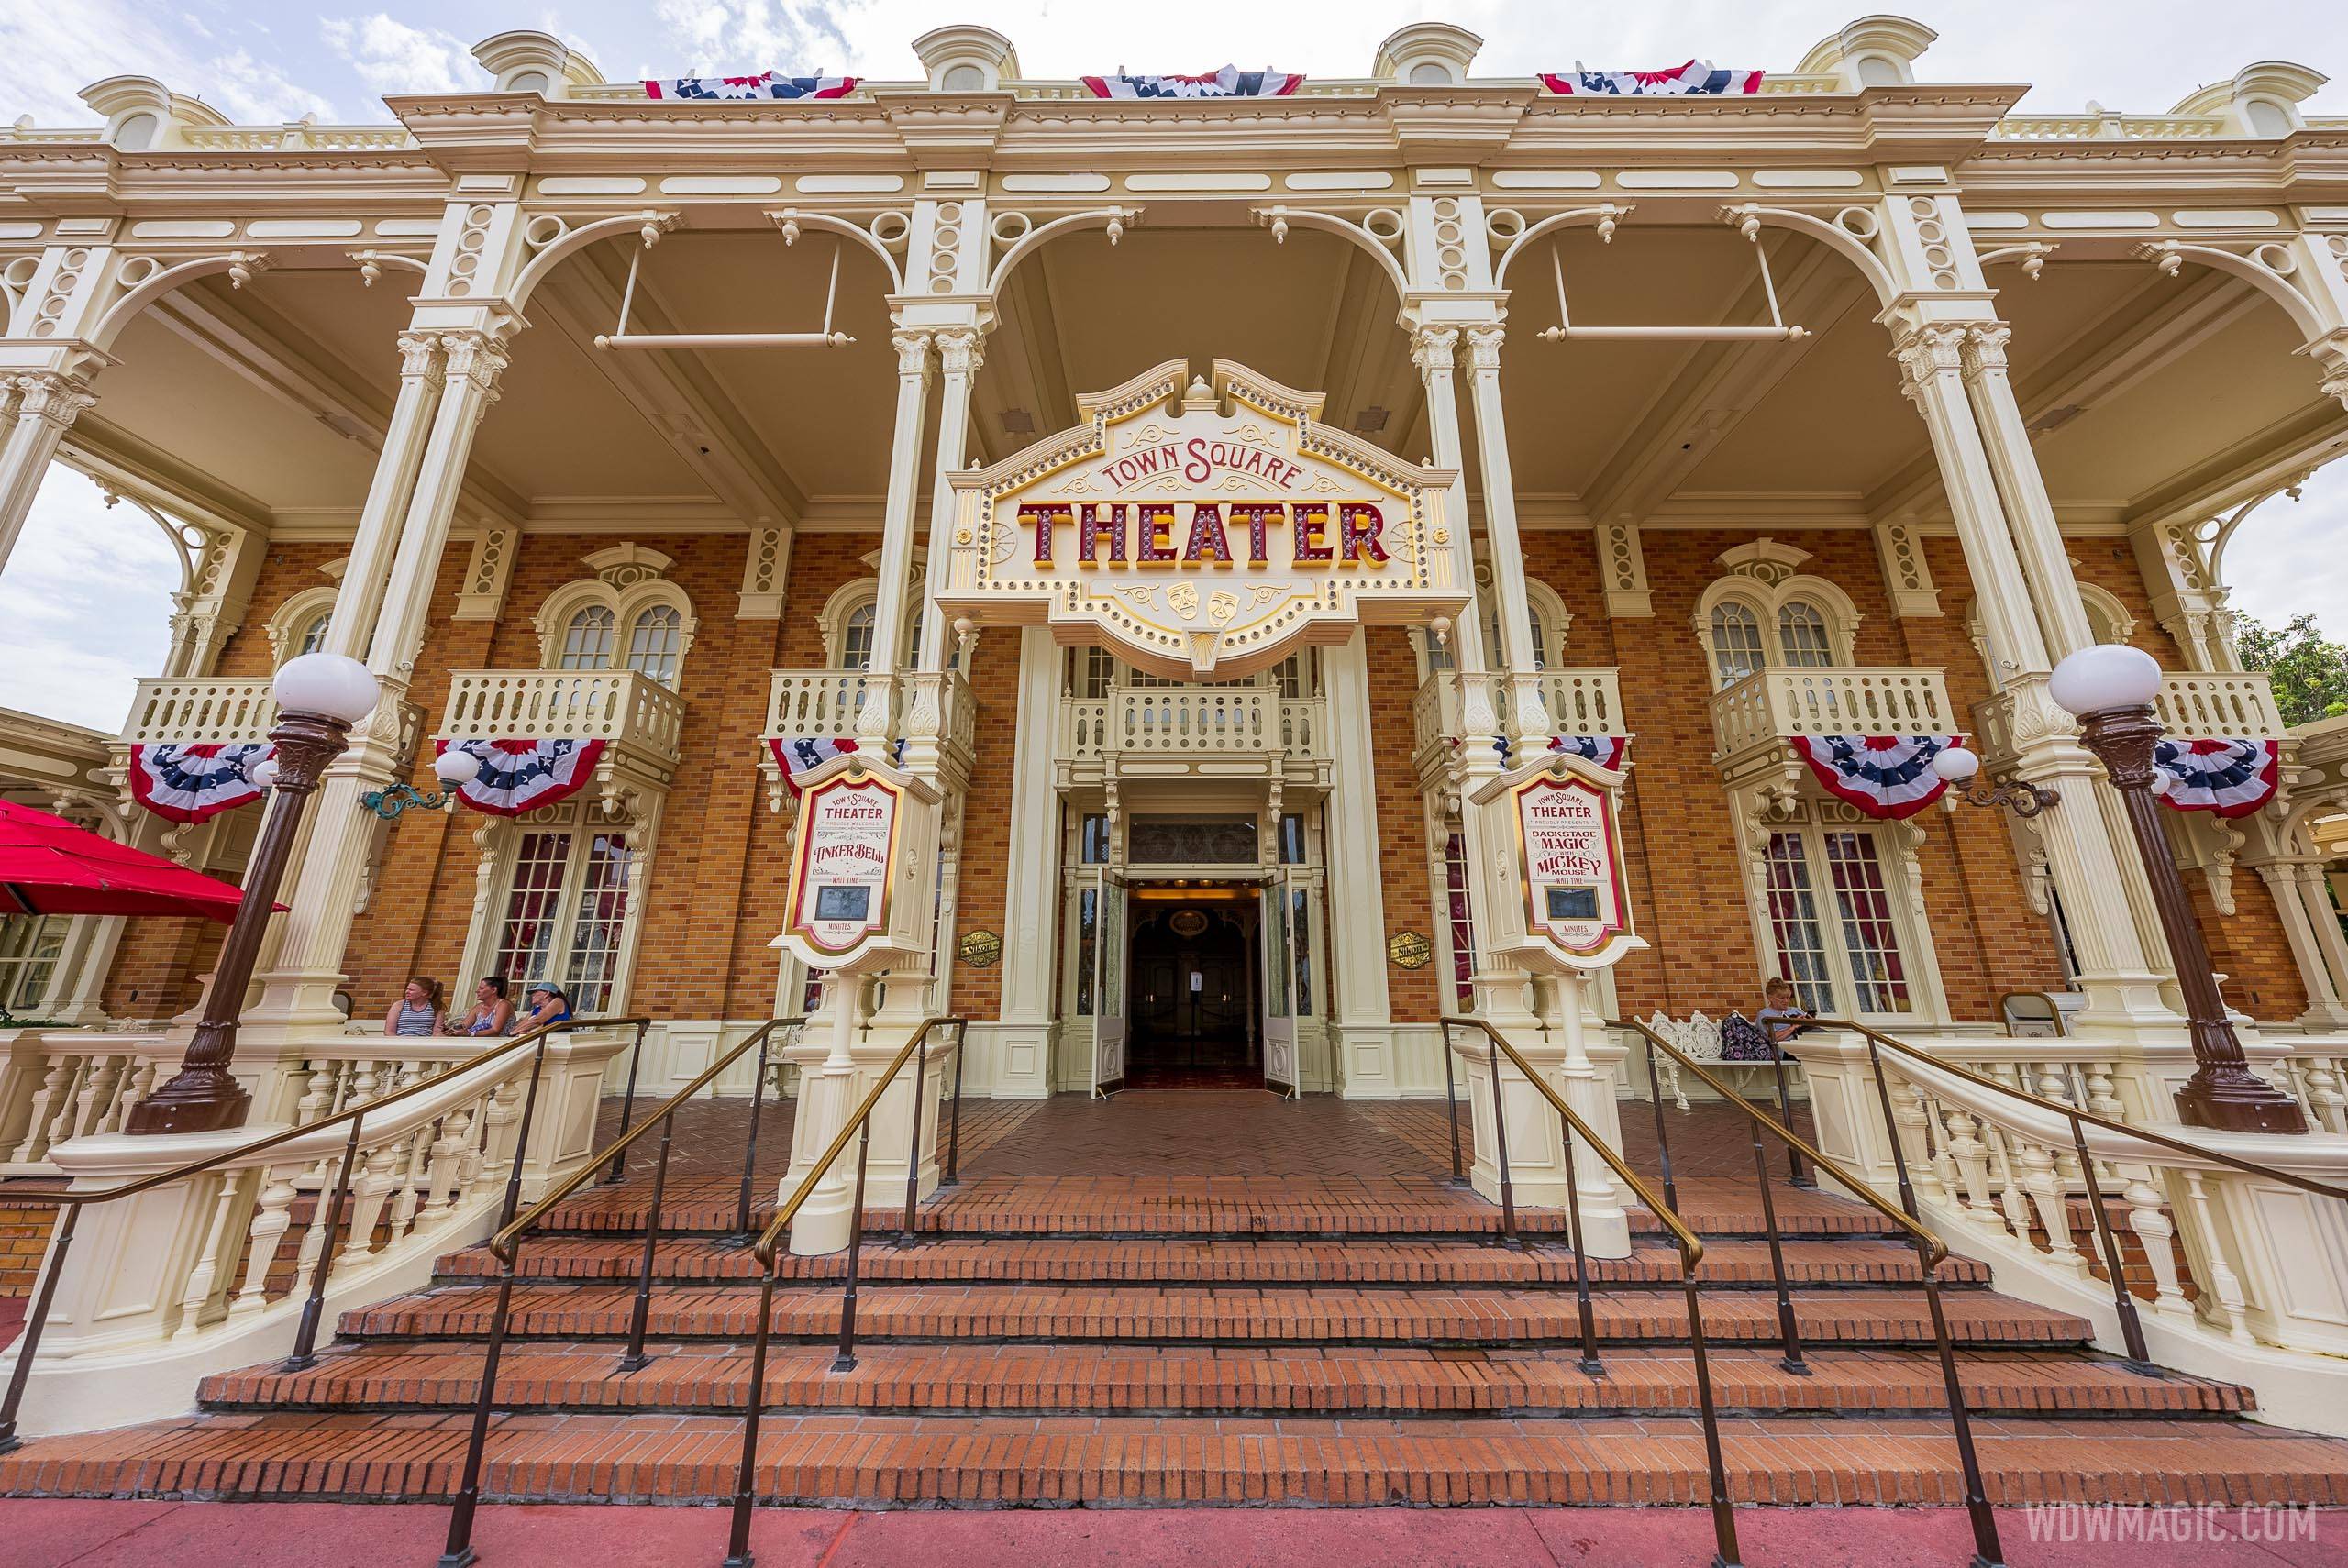 Town Square Theater decorated for July Fourth